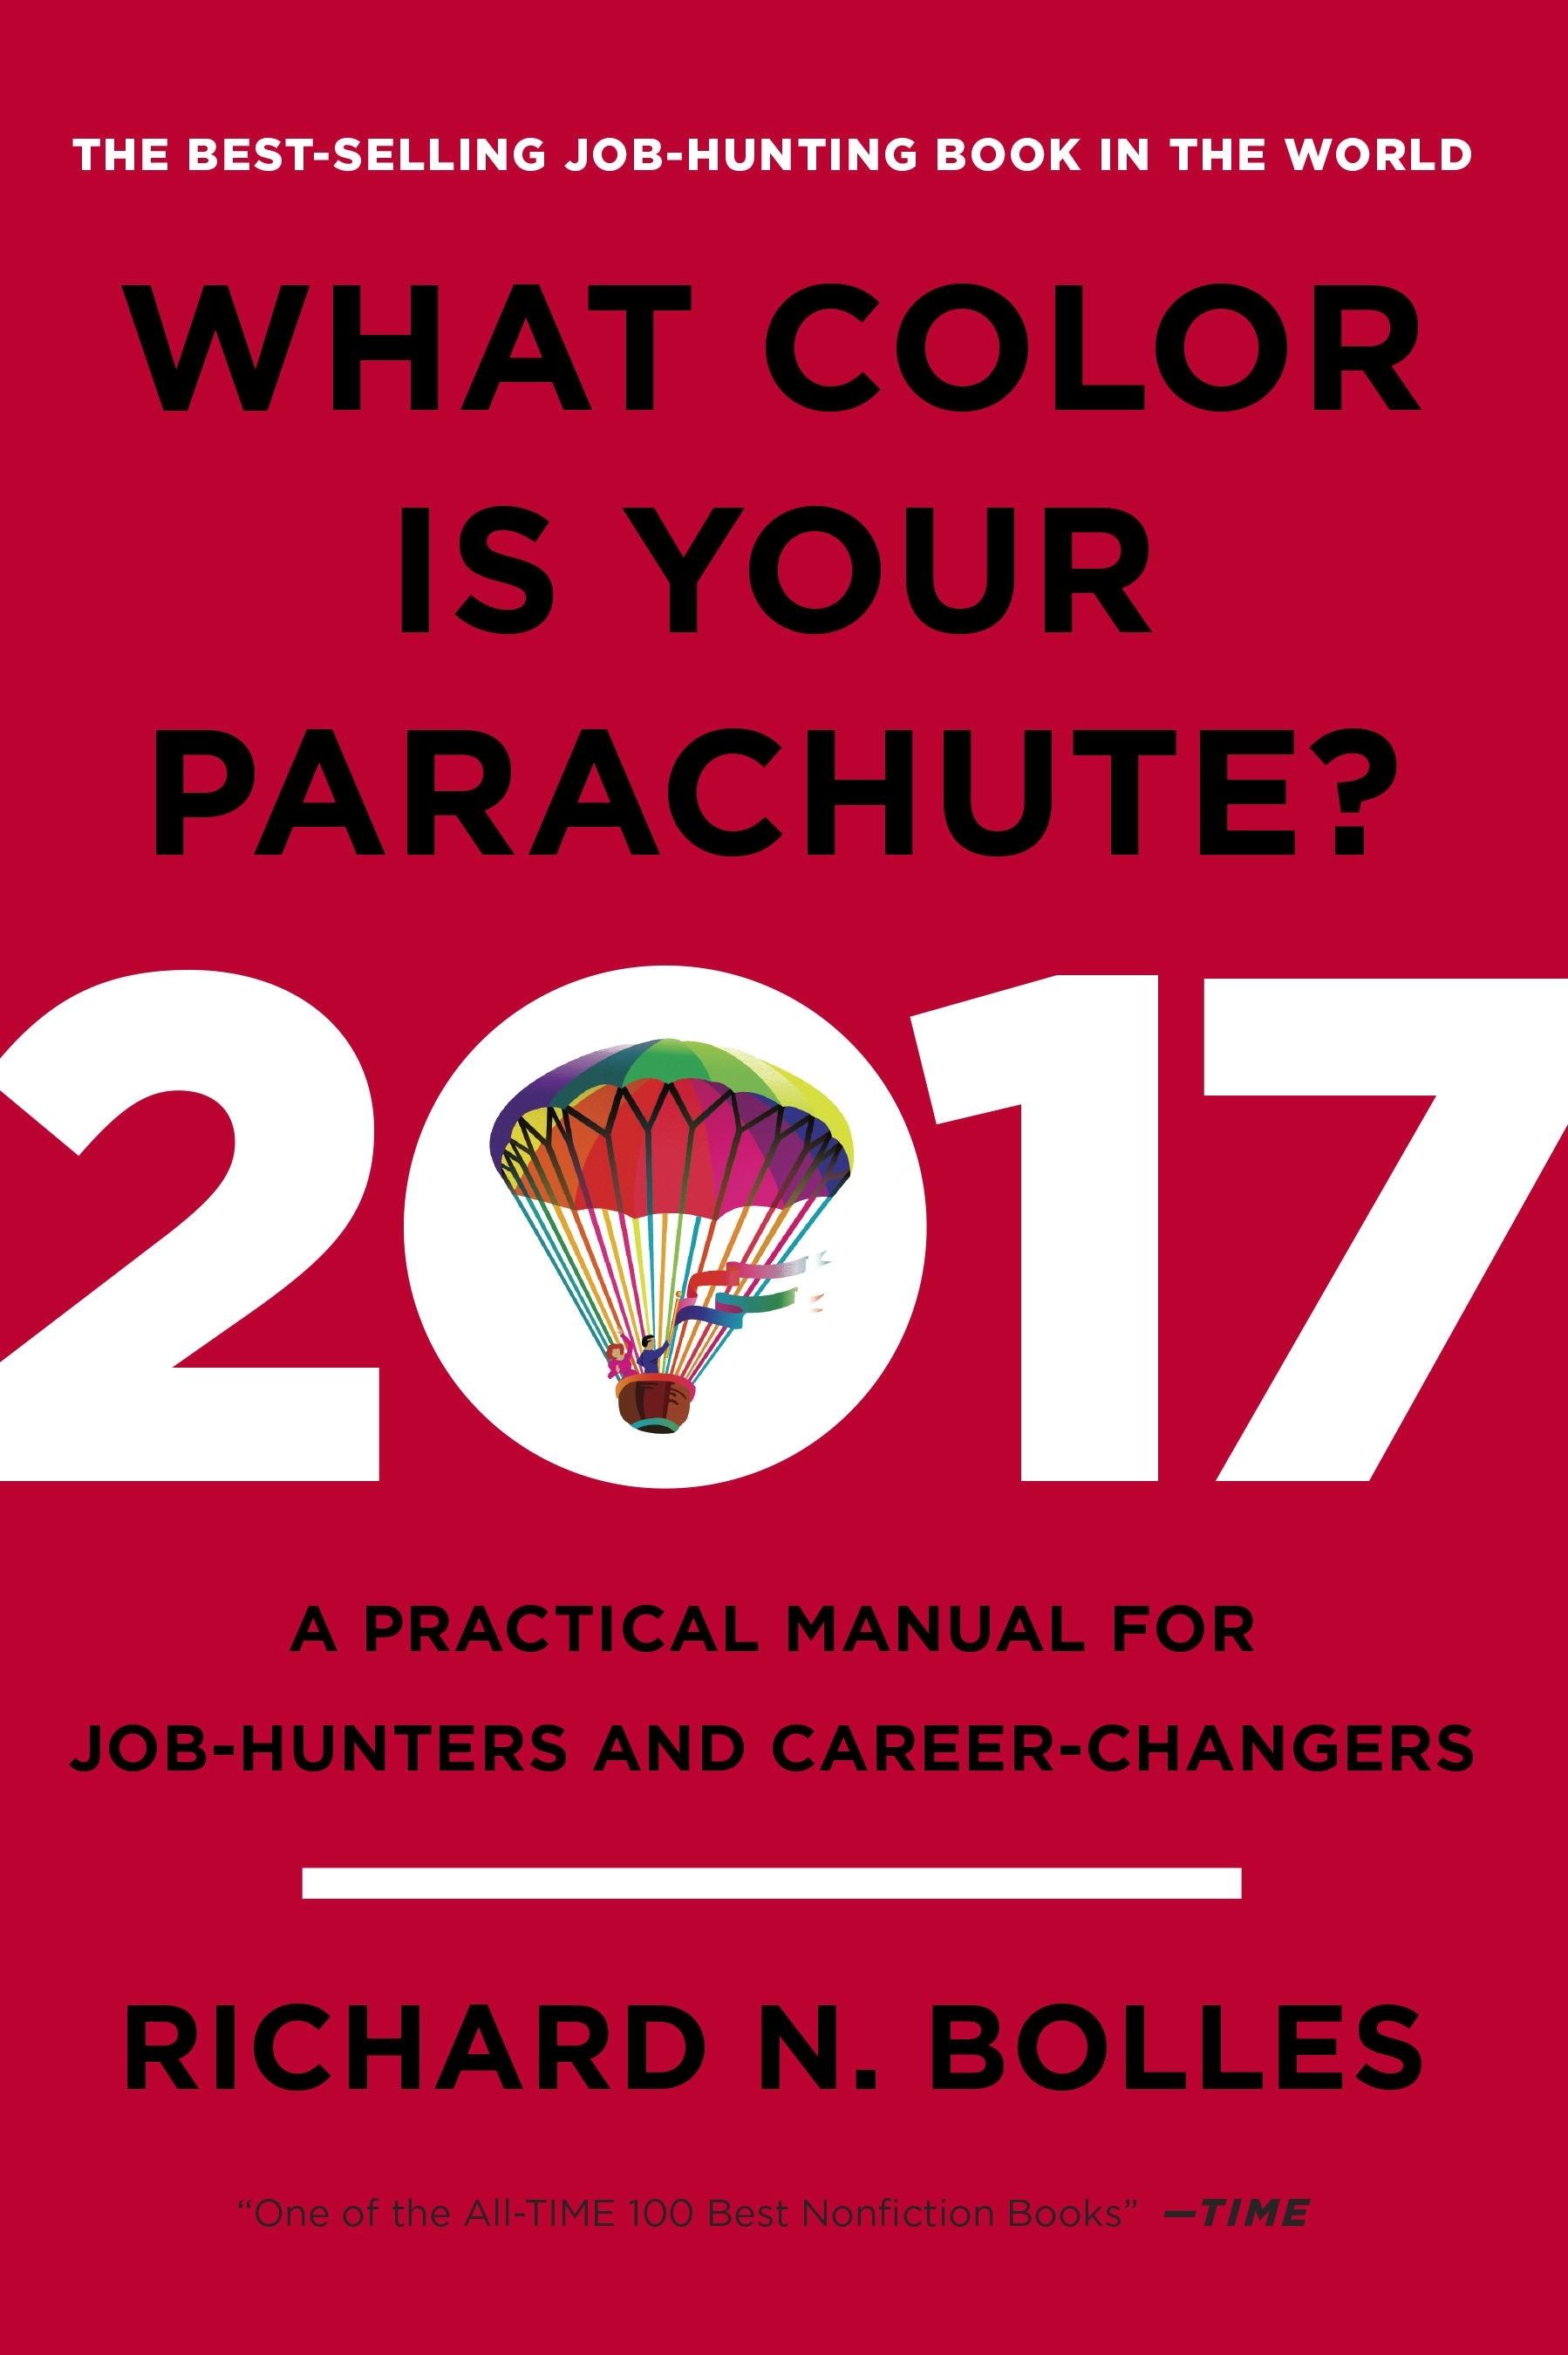 What Color Is Your Parachute 2017 "A Practical Manual for Job-Hunters and Career-Changers"